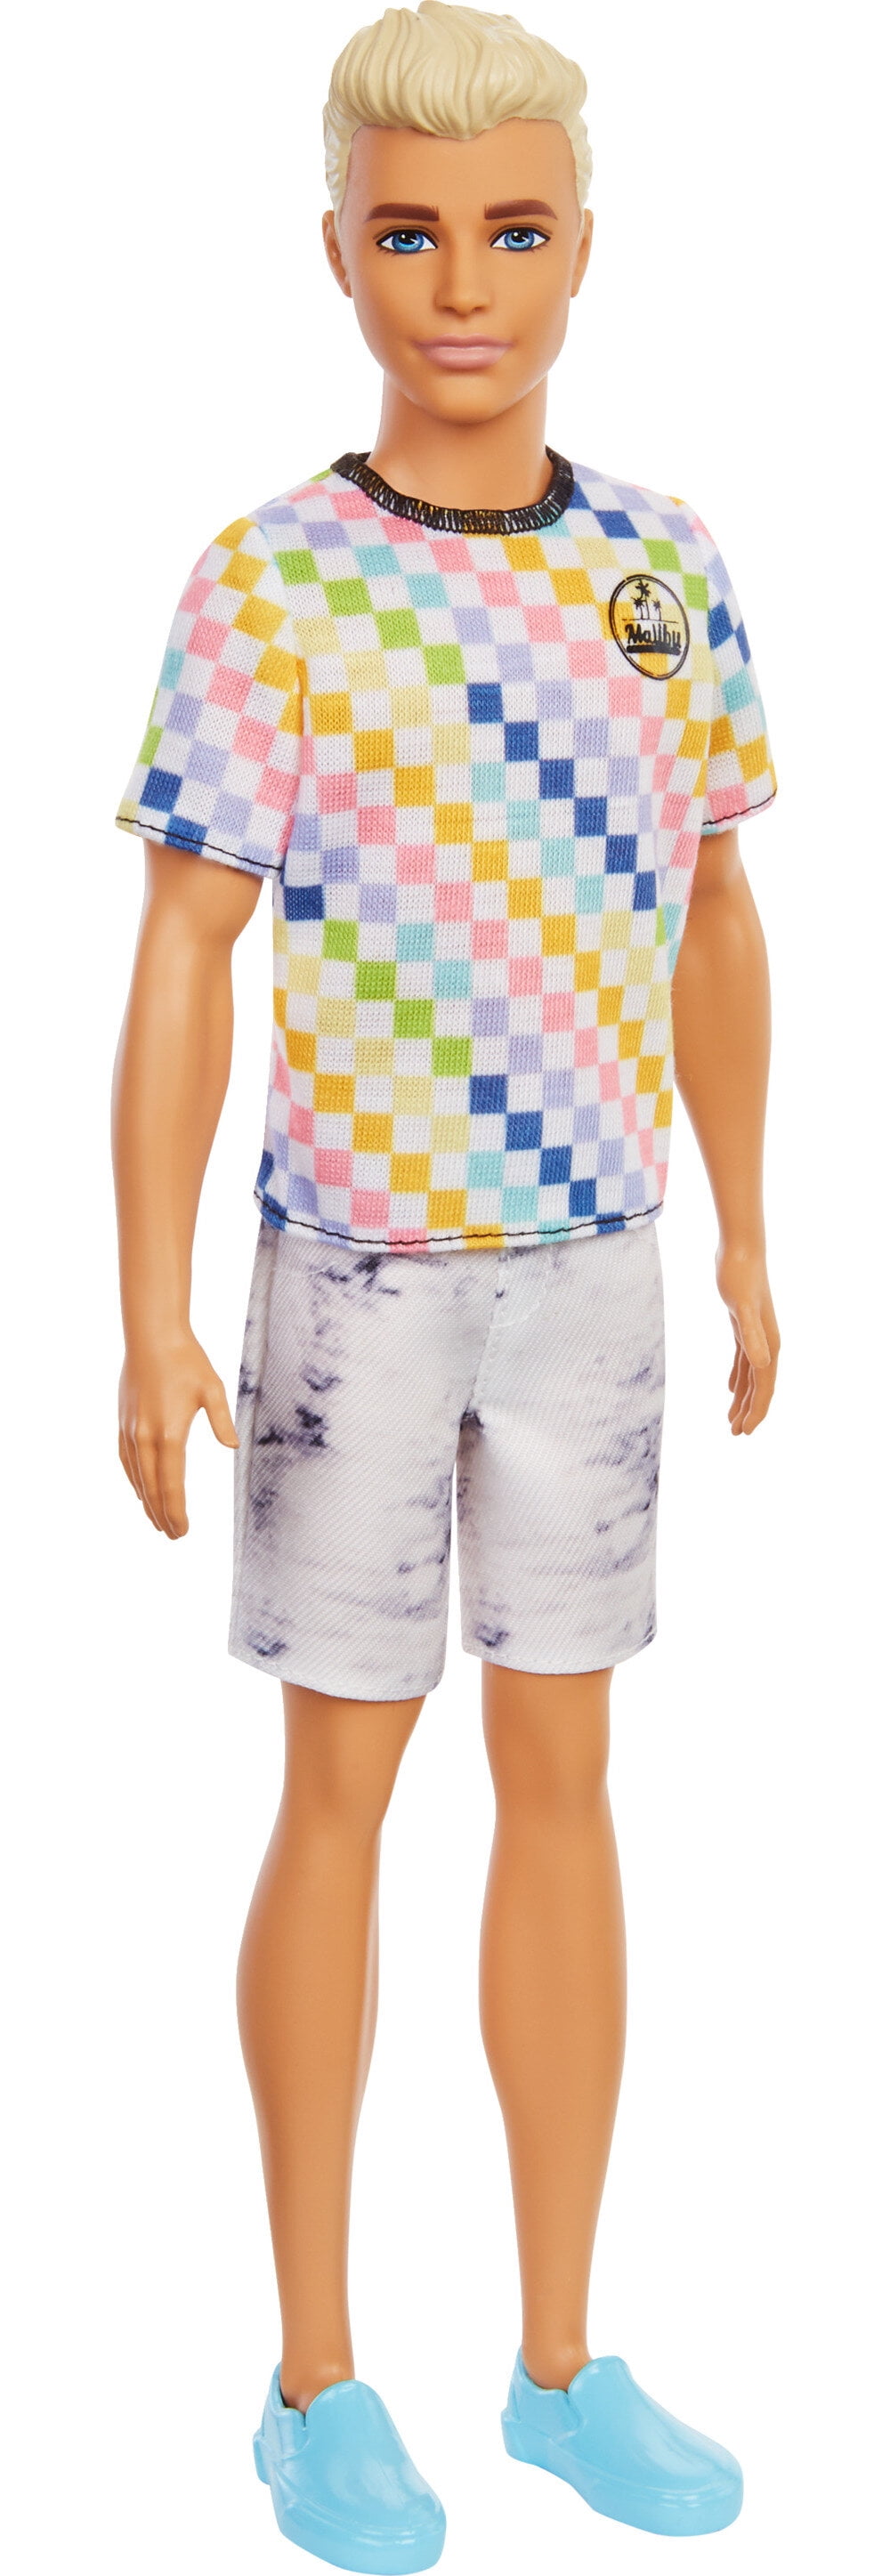 Barbie Ken Fashionistas Doll #174 with Surf-Inspired Checkered Shirt ...